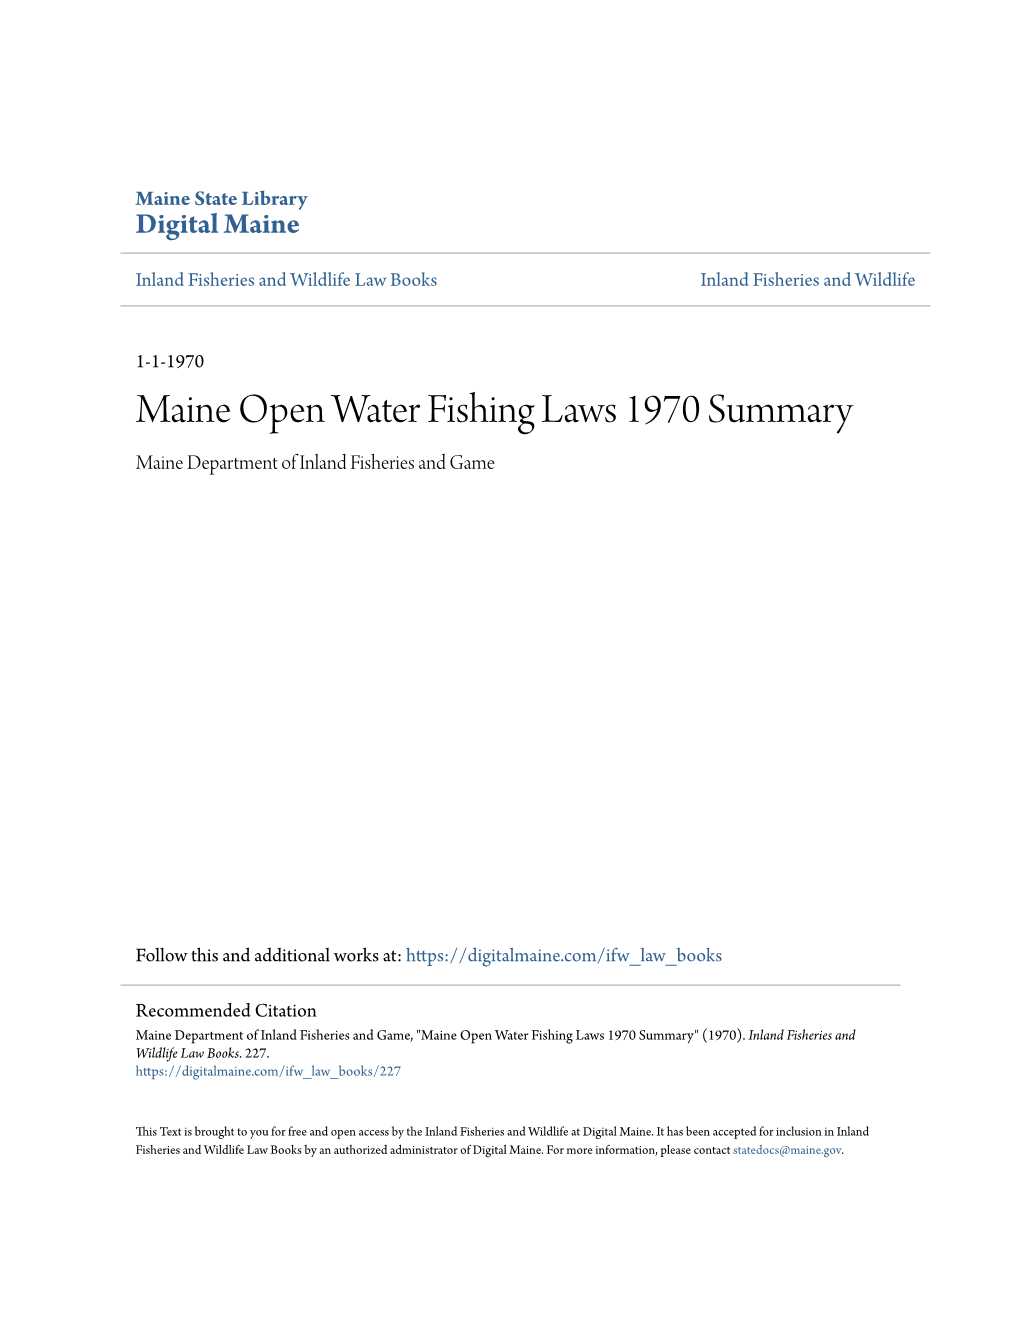 Maine Open Water Fishing Laws 1970 Summary Maine Department of Inland